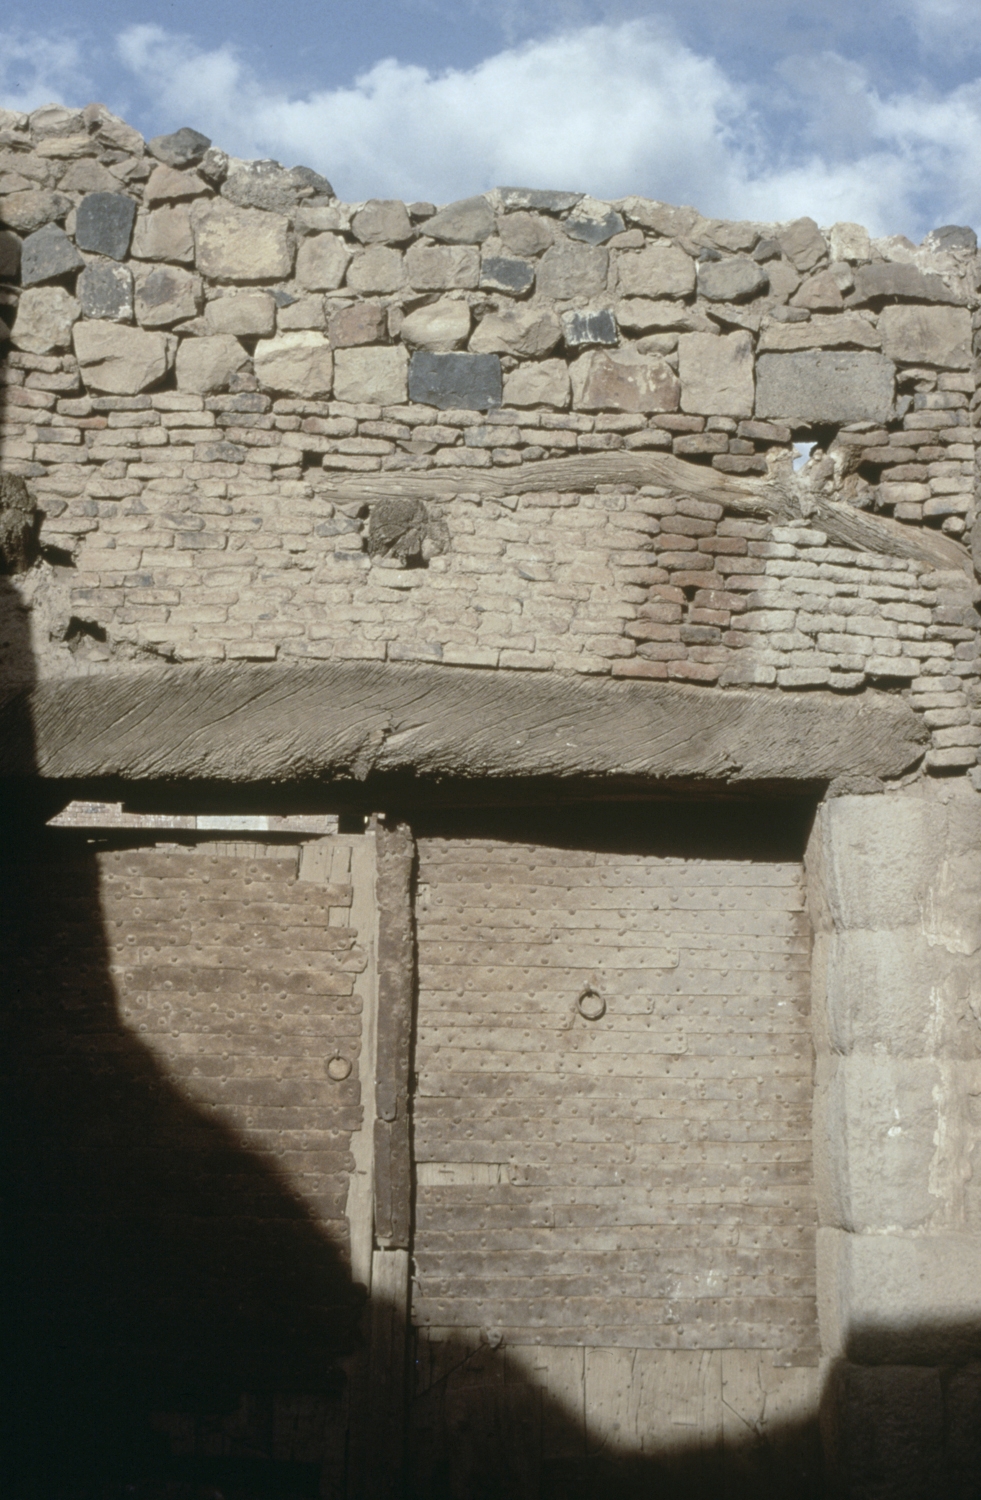 Detail of the masonry supported by a stone beam